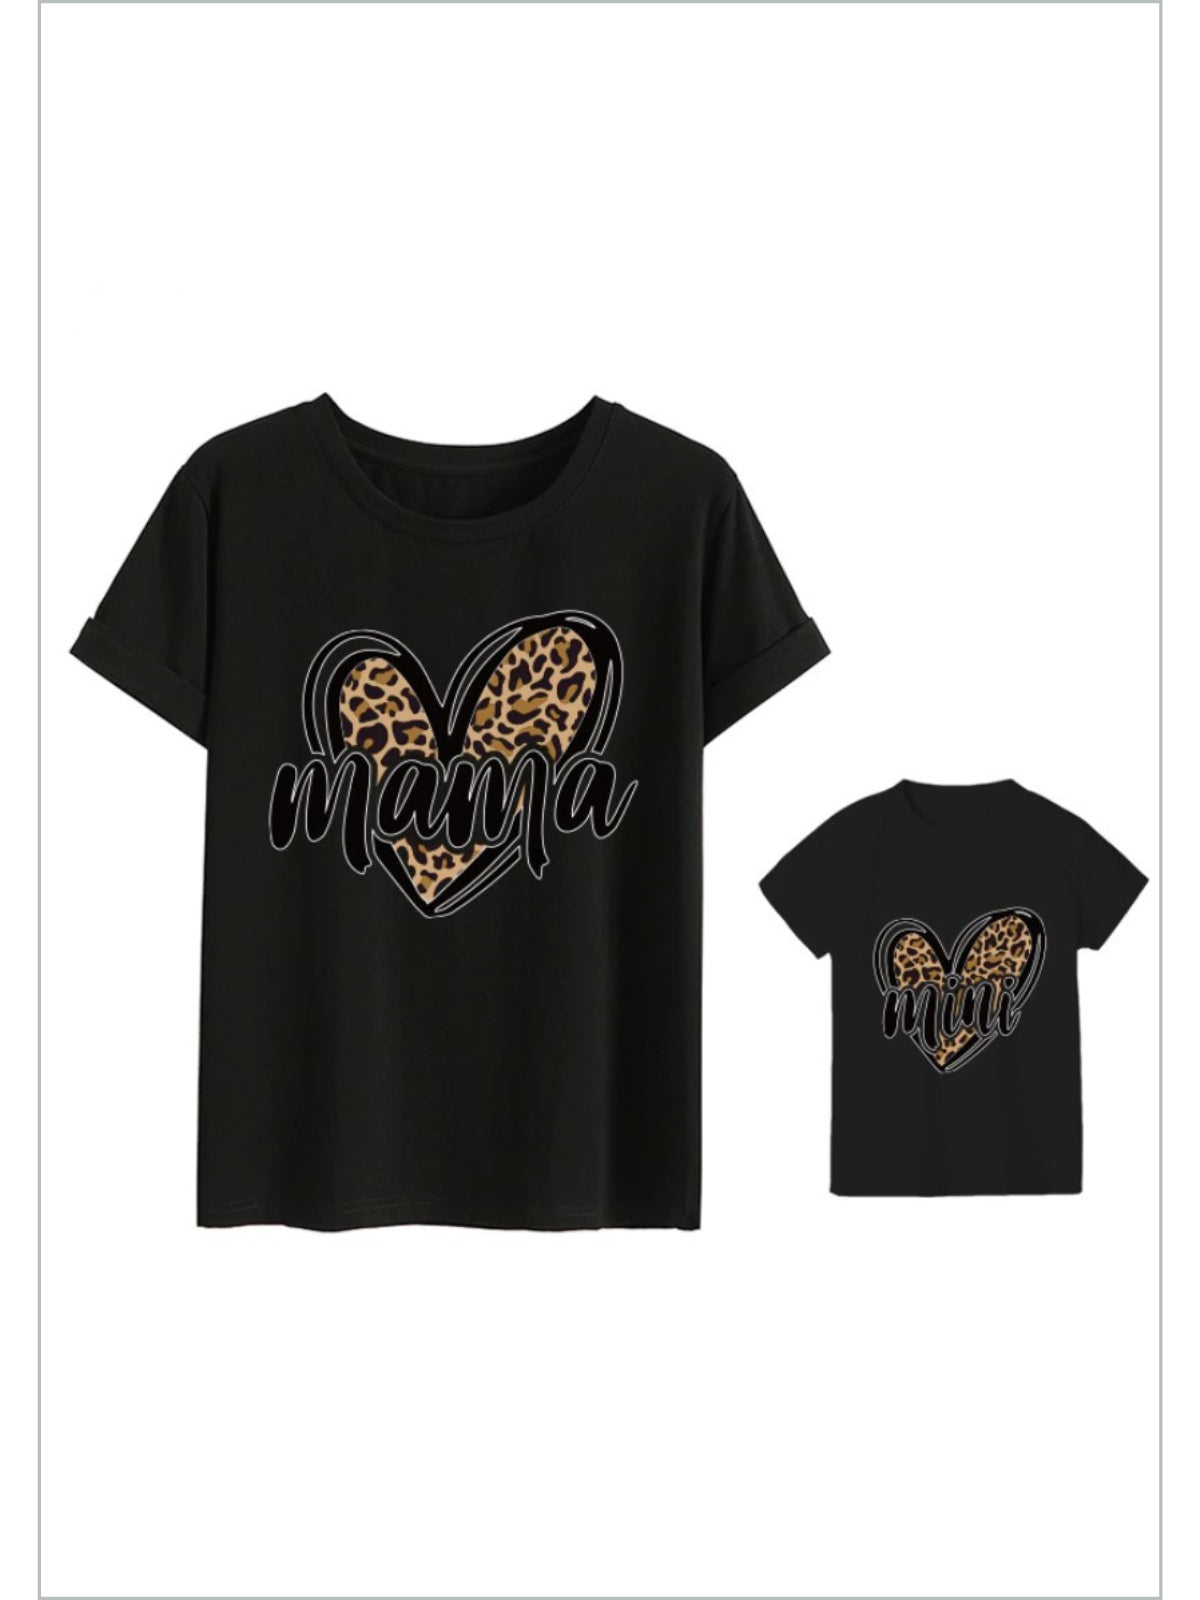 Mommy & Me Matching Tops | Leopard Heart Graphic Tee | Mia Belle Girls